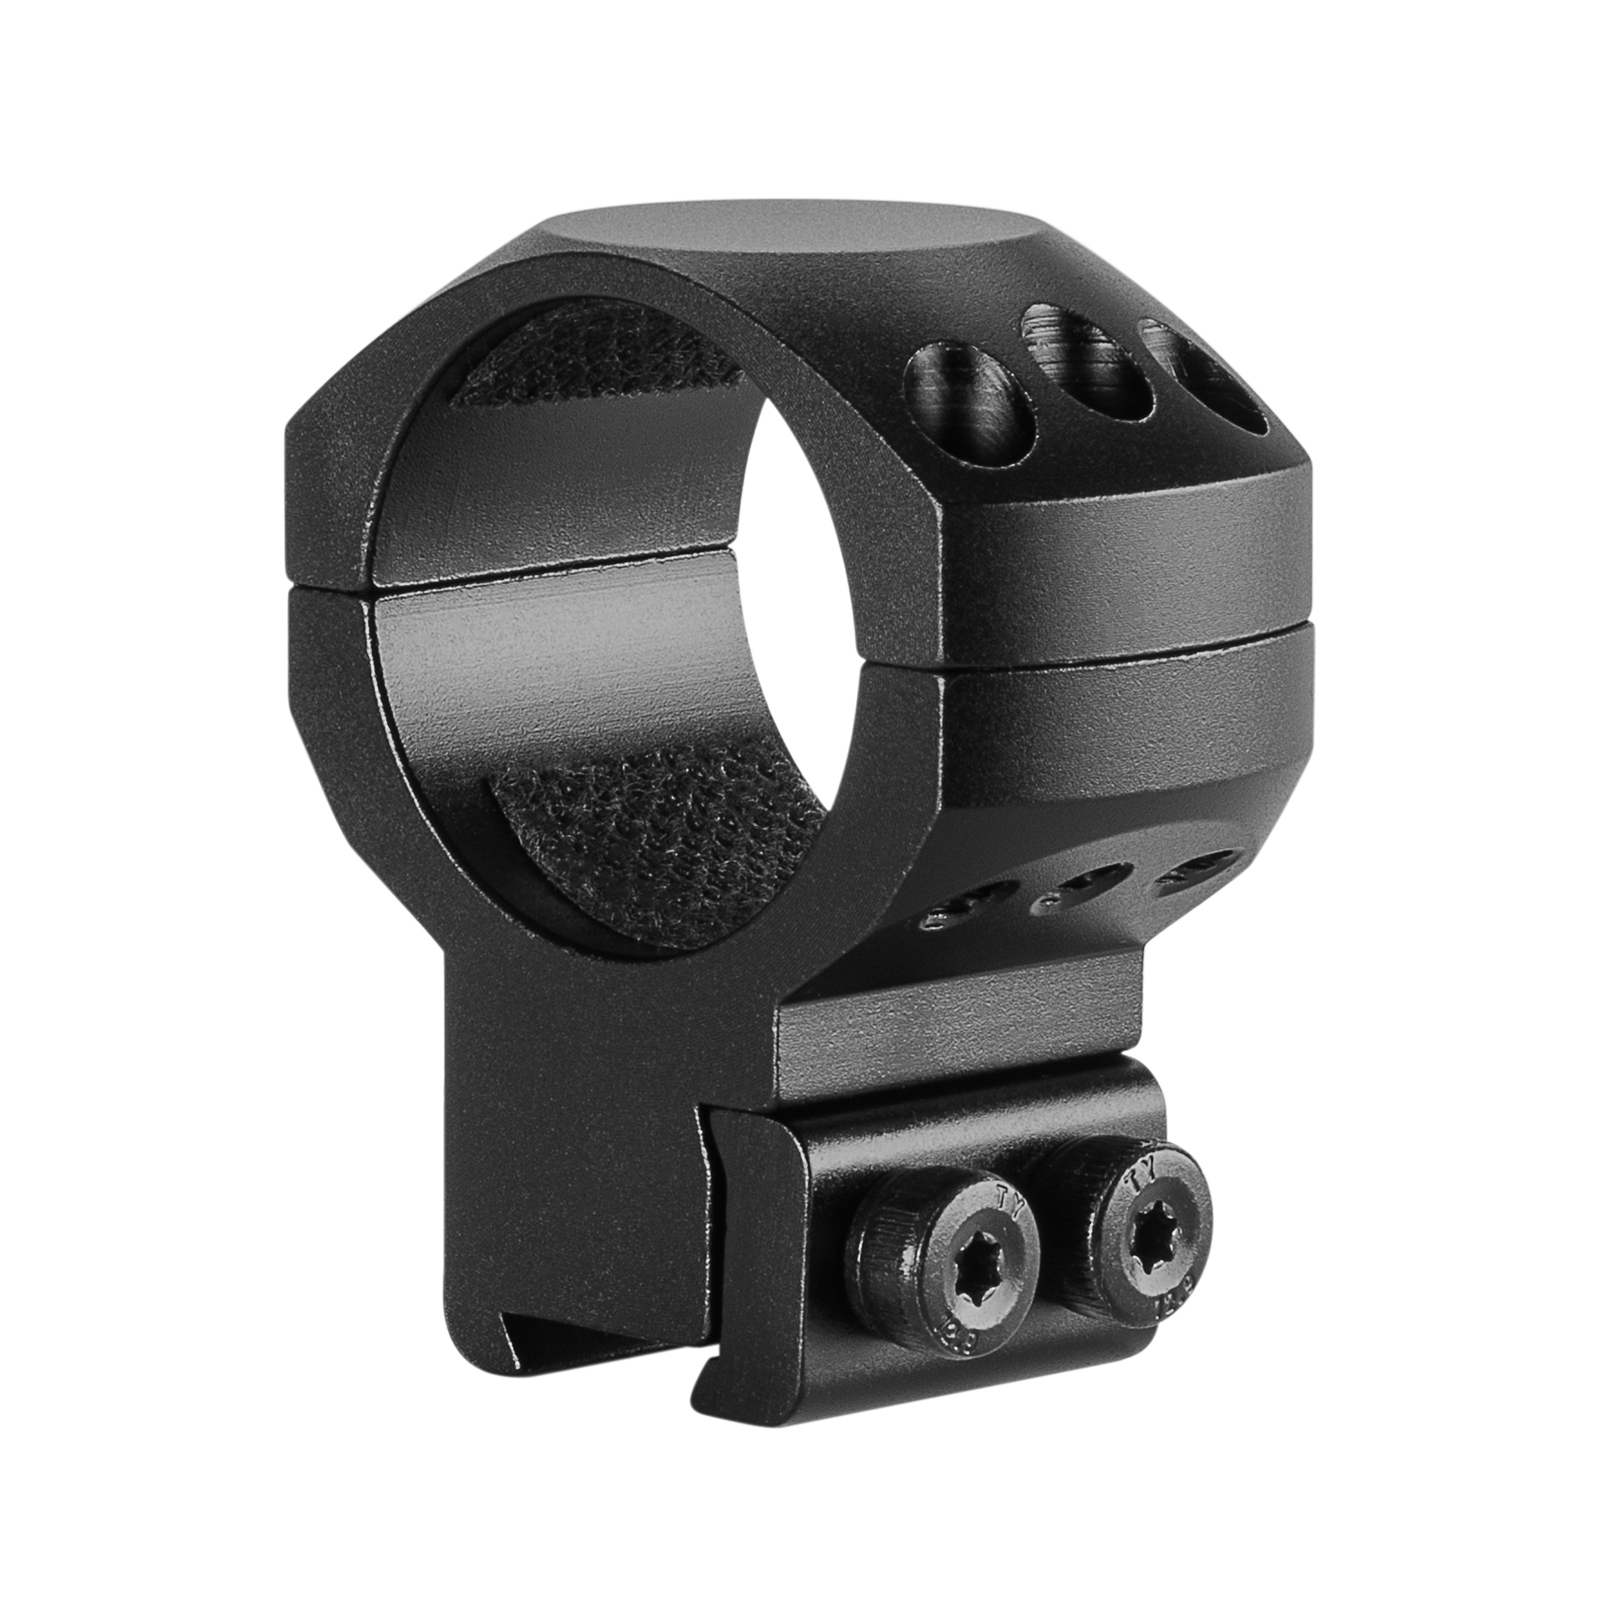 Hawke Tactical Ring Mounts - 9-11mm Dovetail 30mm High